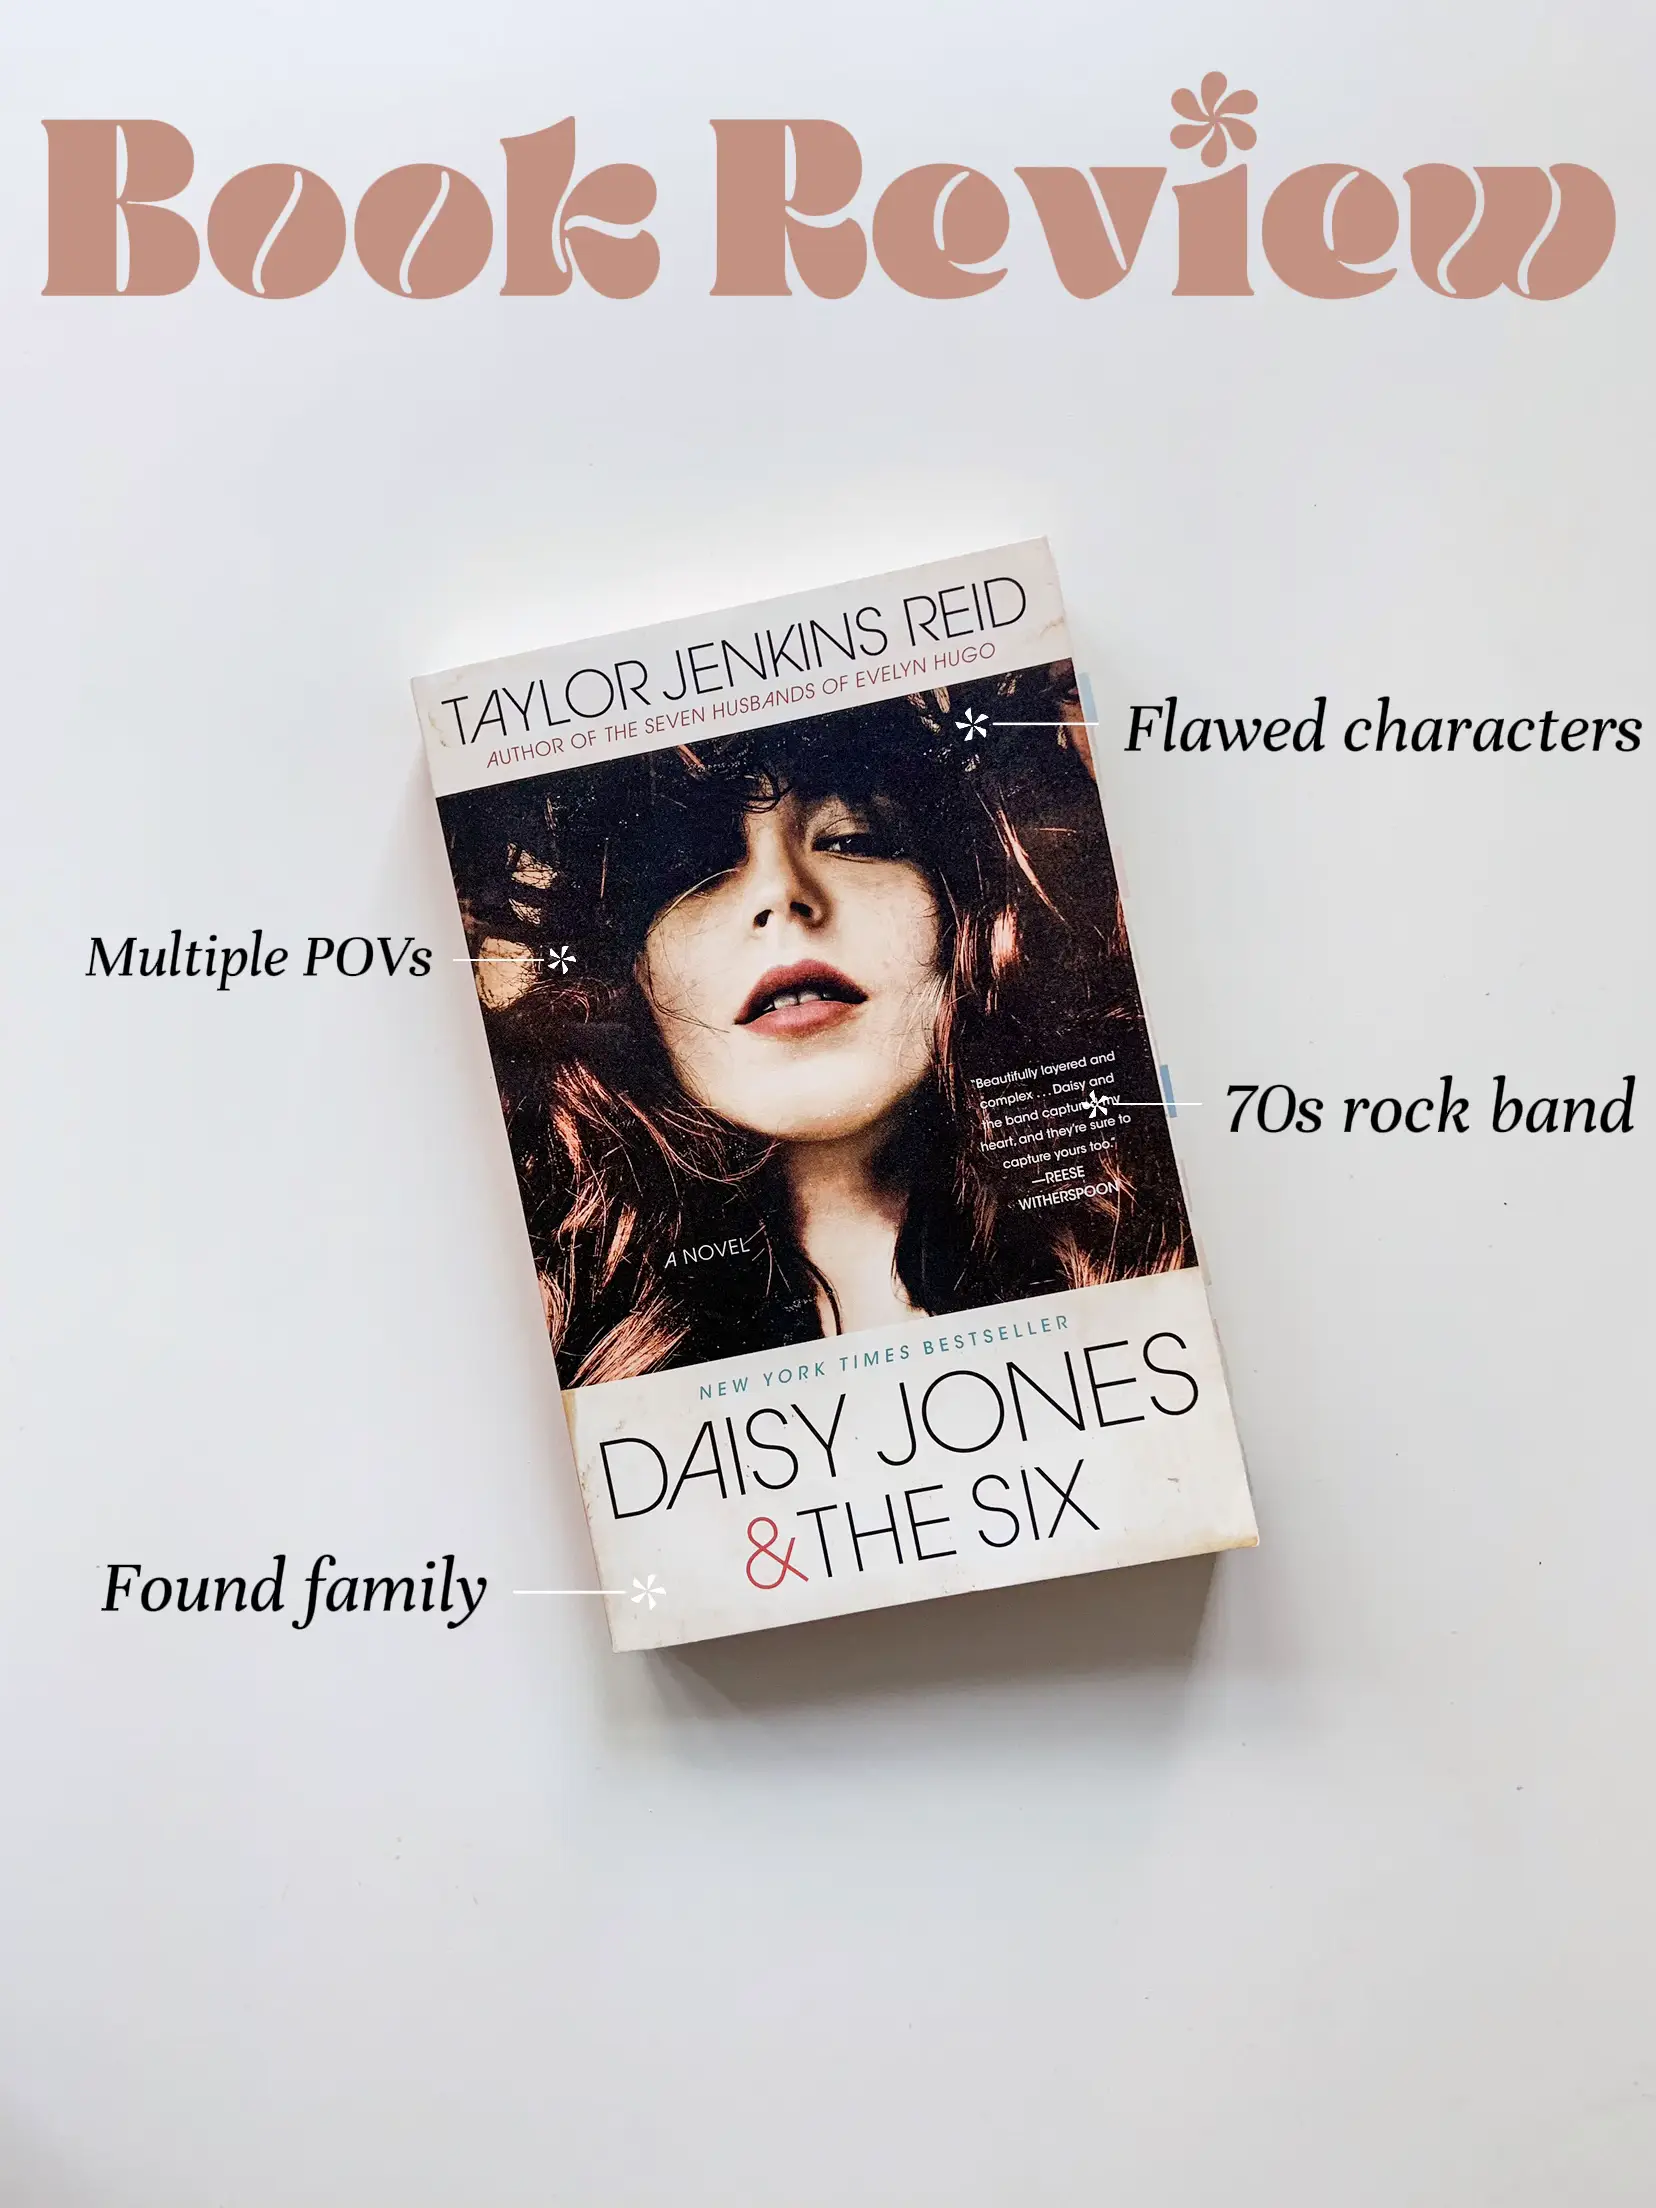 New Series, 'Daisy Jones & The Six,' About Fictitious '70s Rock Band,  Arrives